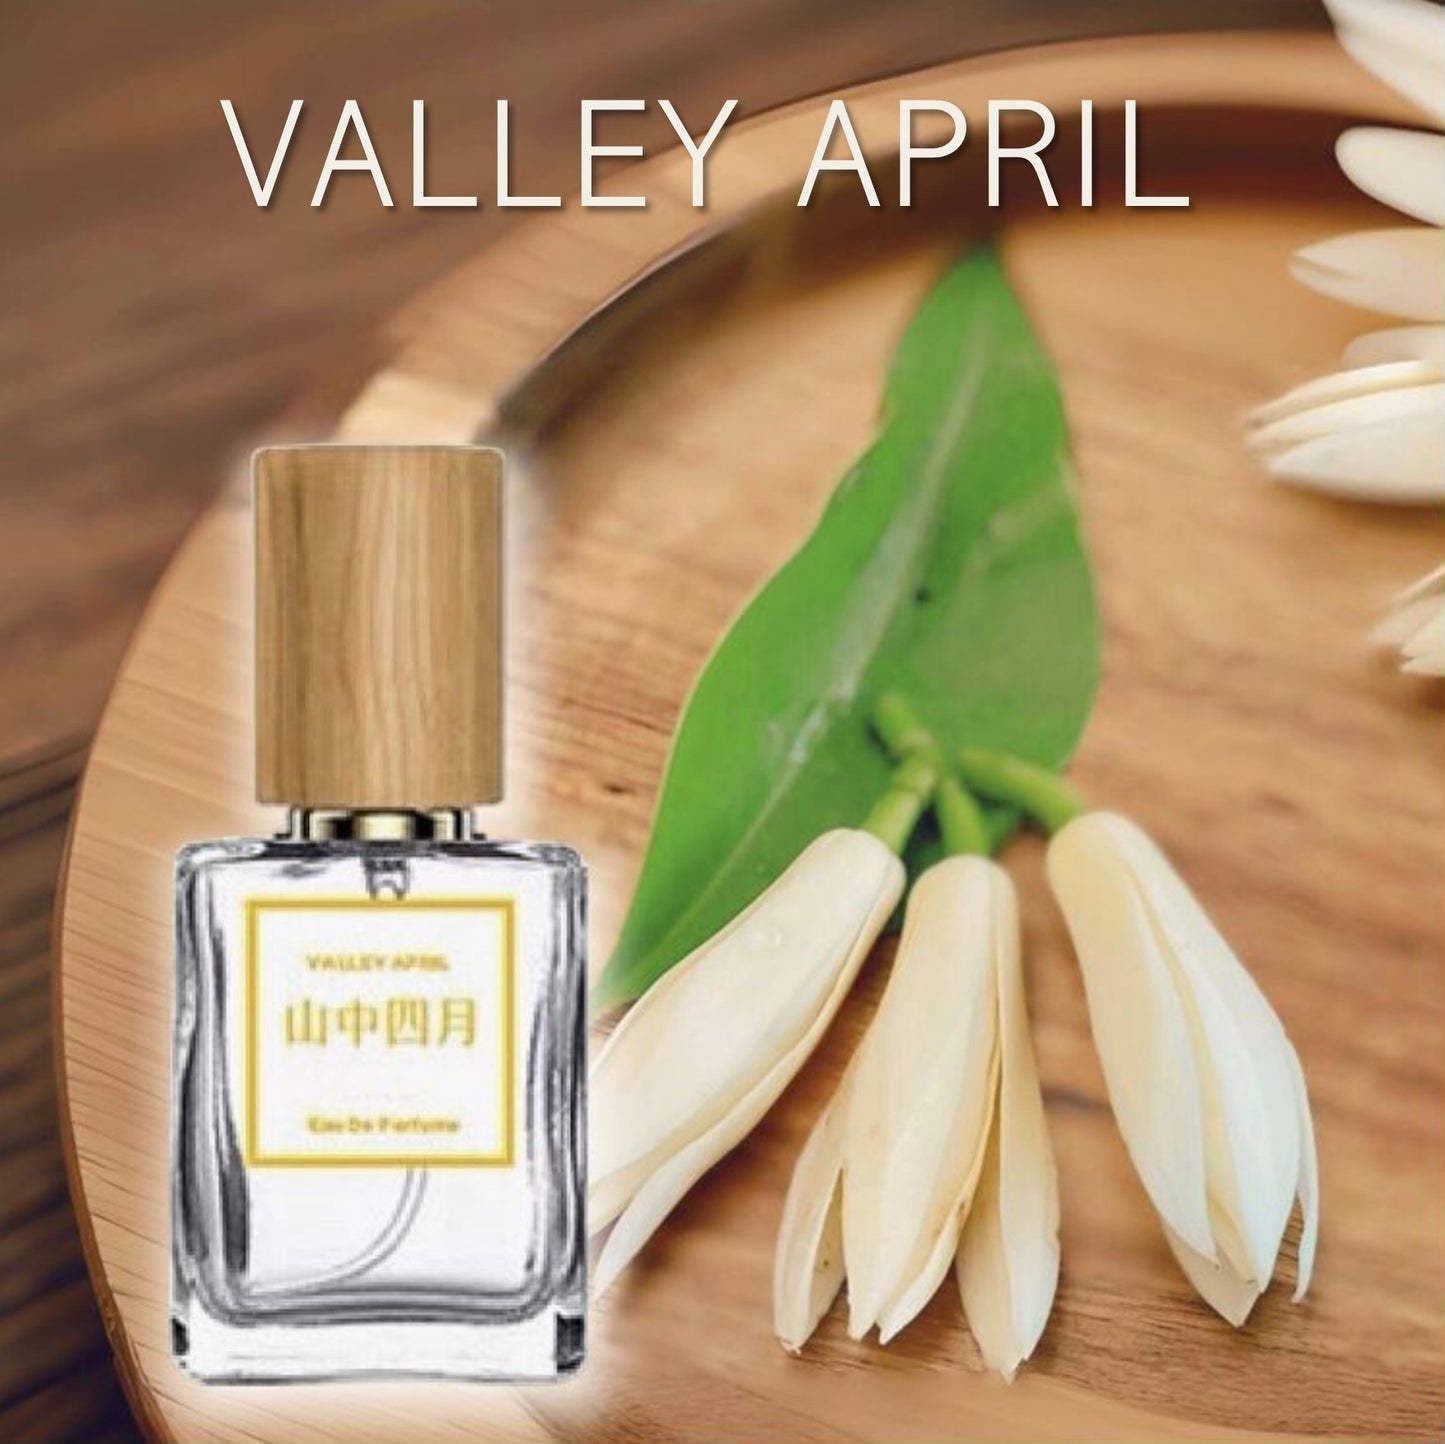 Extrodinary Orient White Orchid Perfume